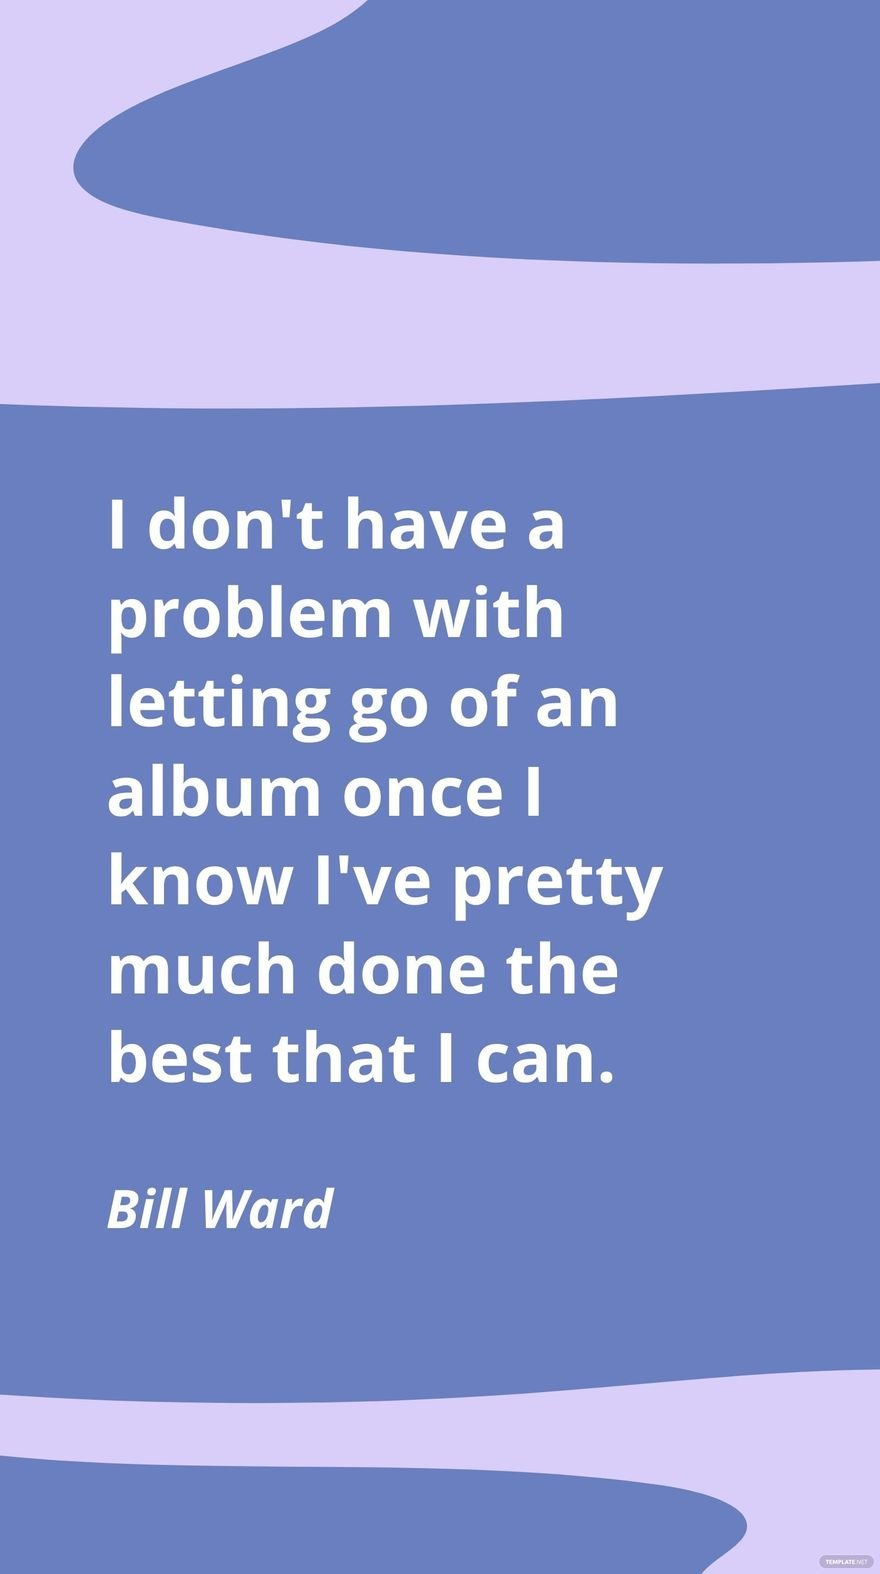 Bill Ward - I don't have a problem with letting go of an album once I know I've pretty much done the best that I can. in JPG